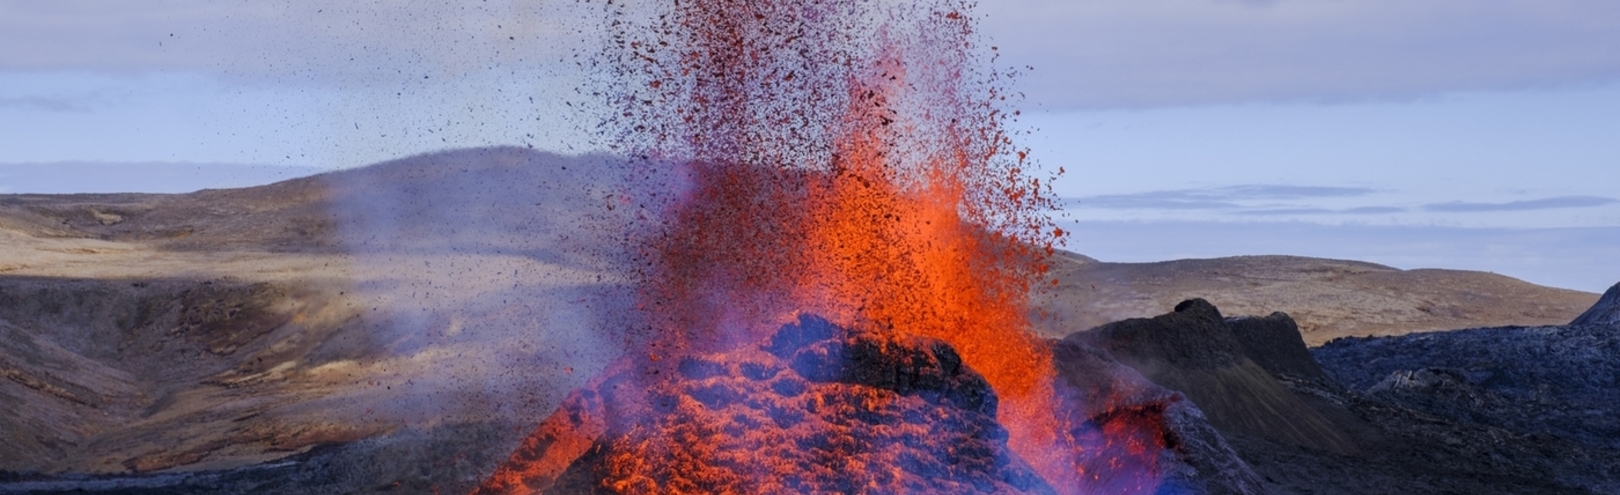 Iceland volcano eruption opens a rare window into the Earth beneath our feet - Available at University of Iceland